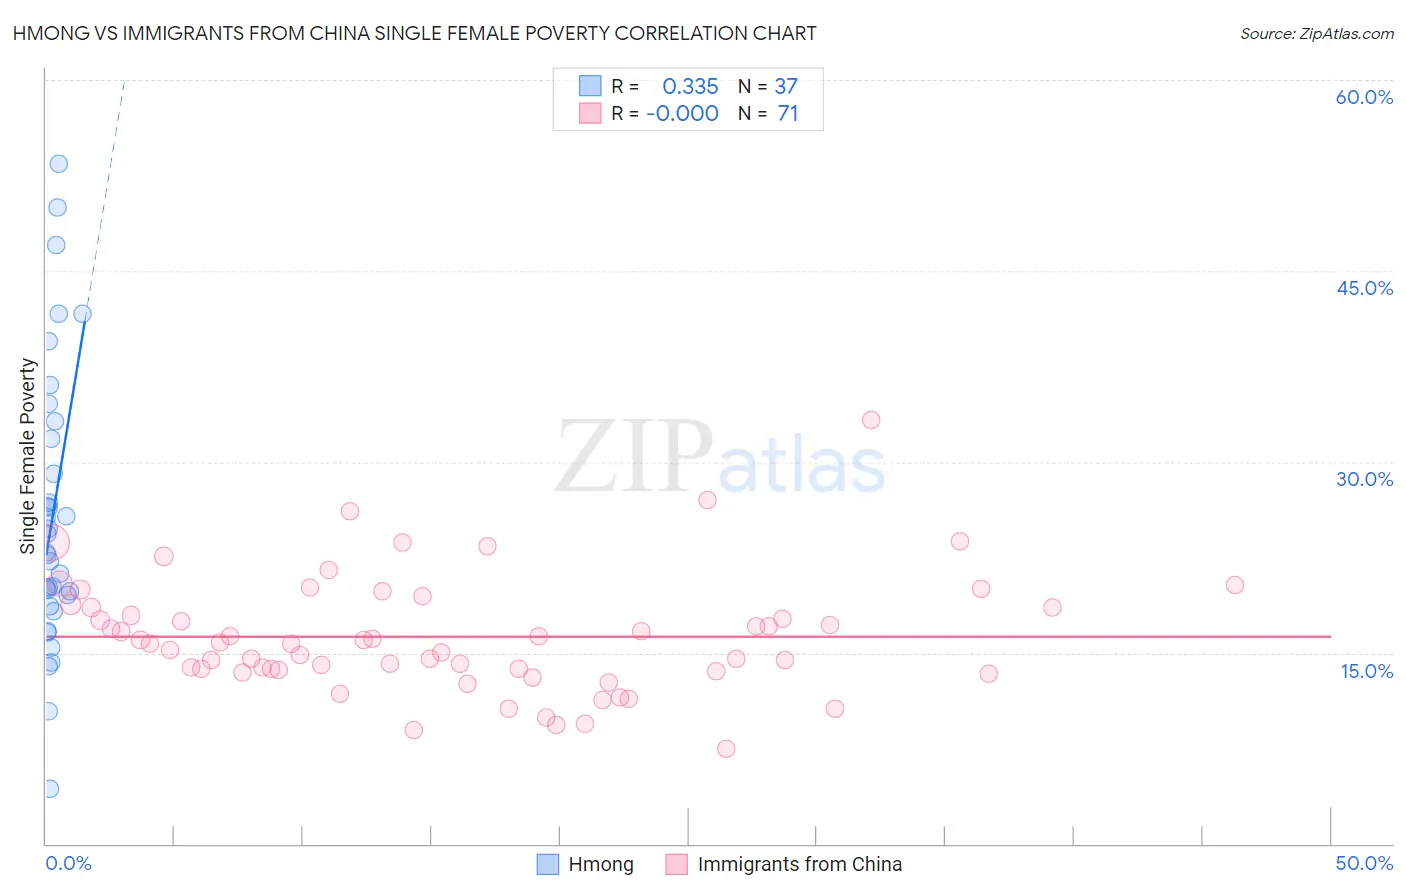 Hmong vs Immigrants from China Single Female Poverty